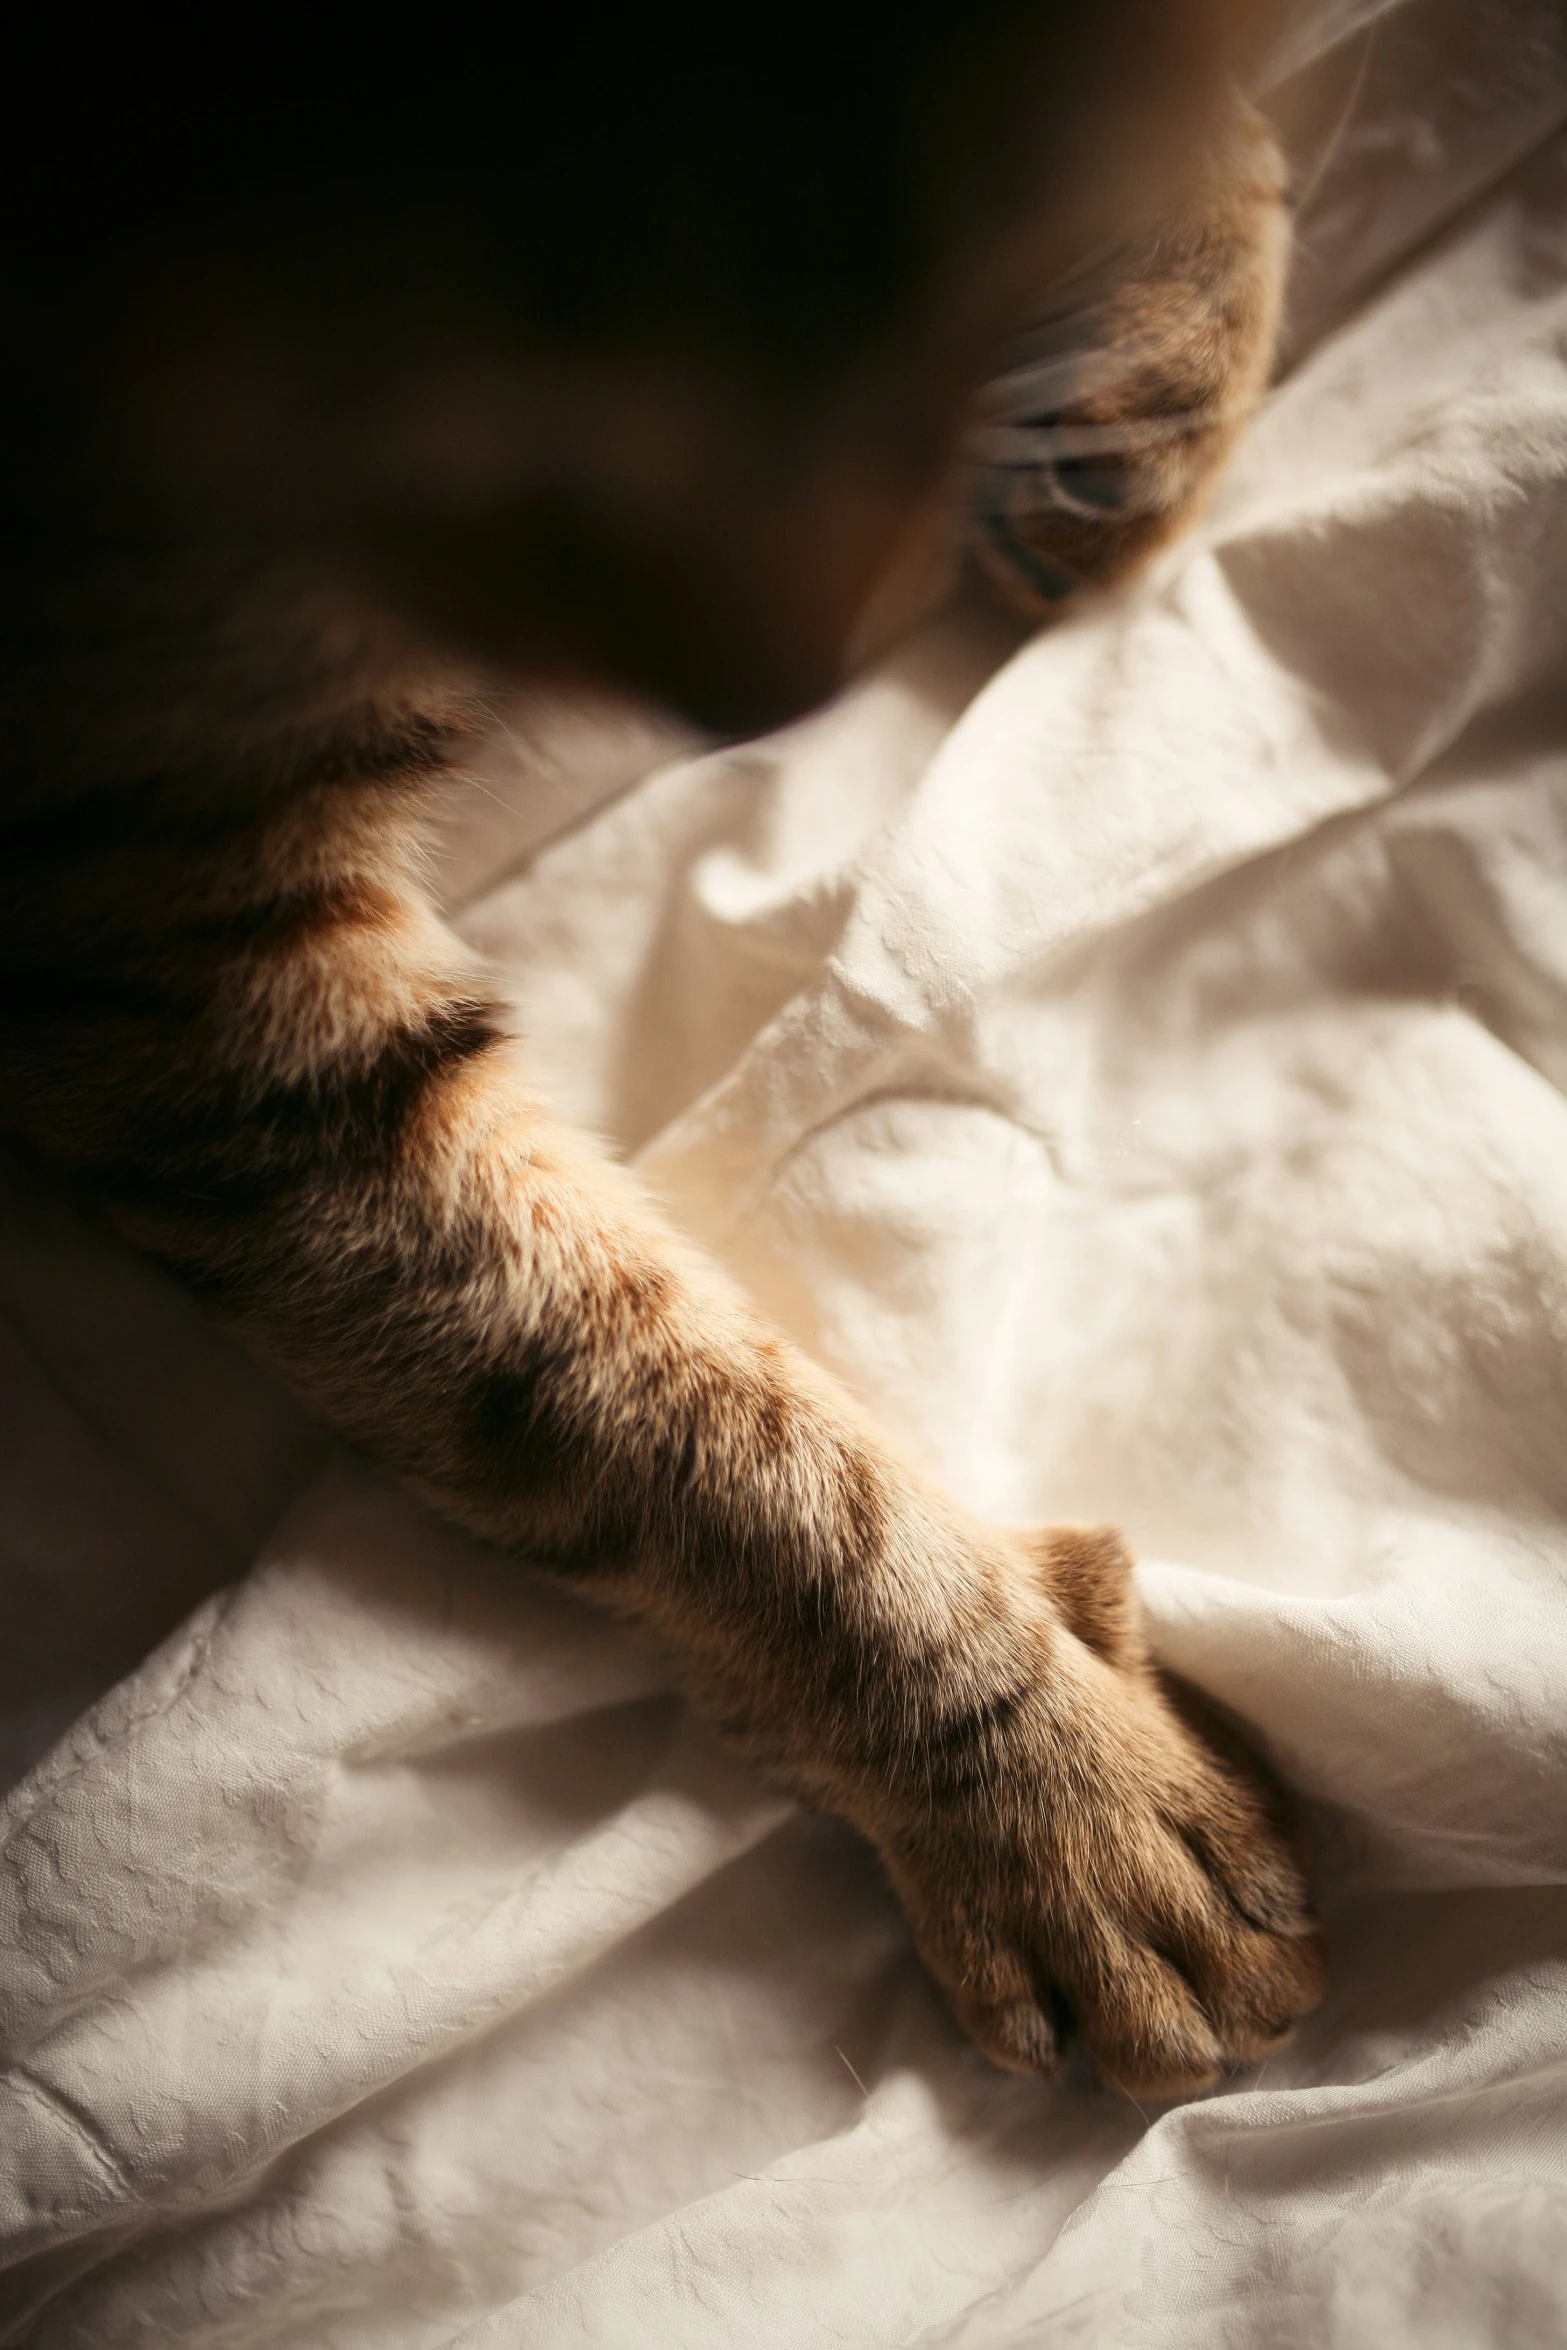 closeup of a cat lying in a bed with sheets